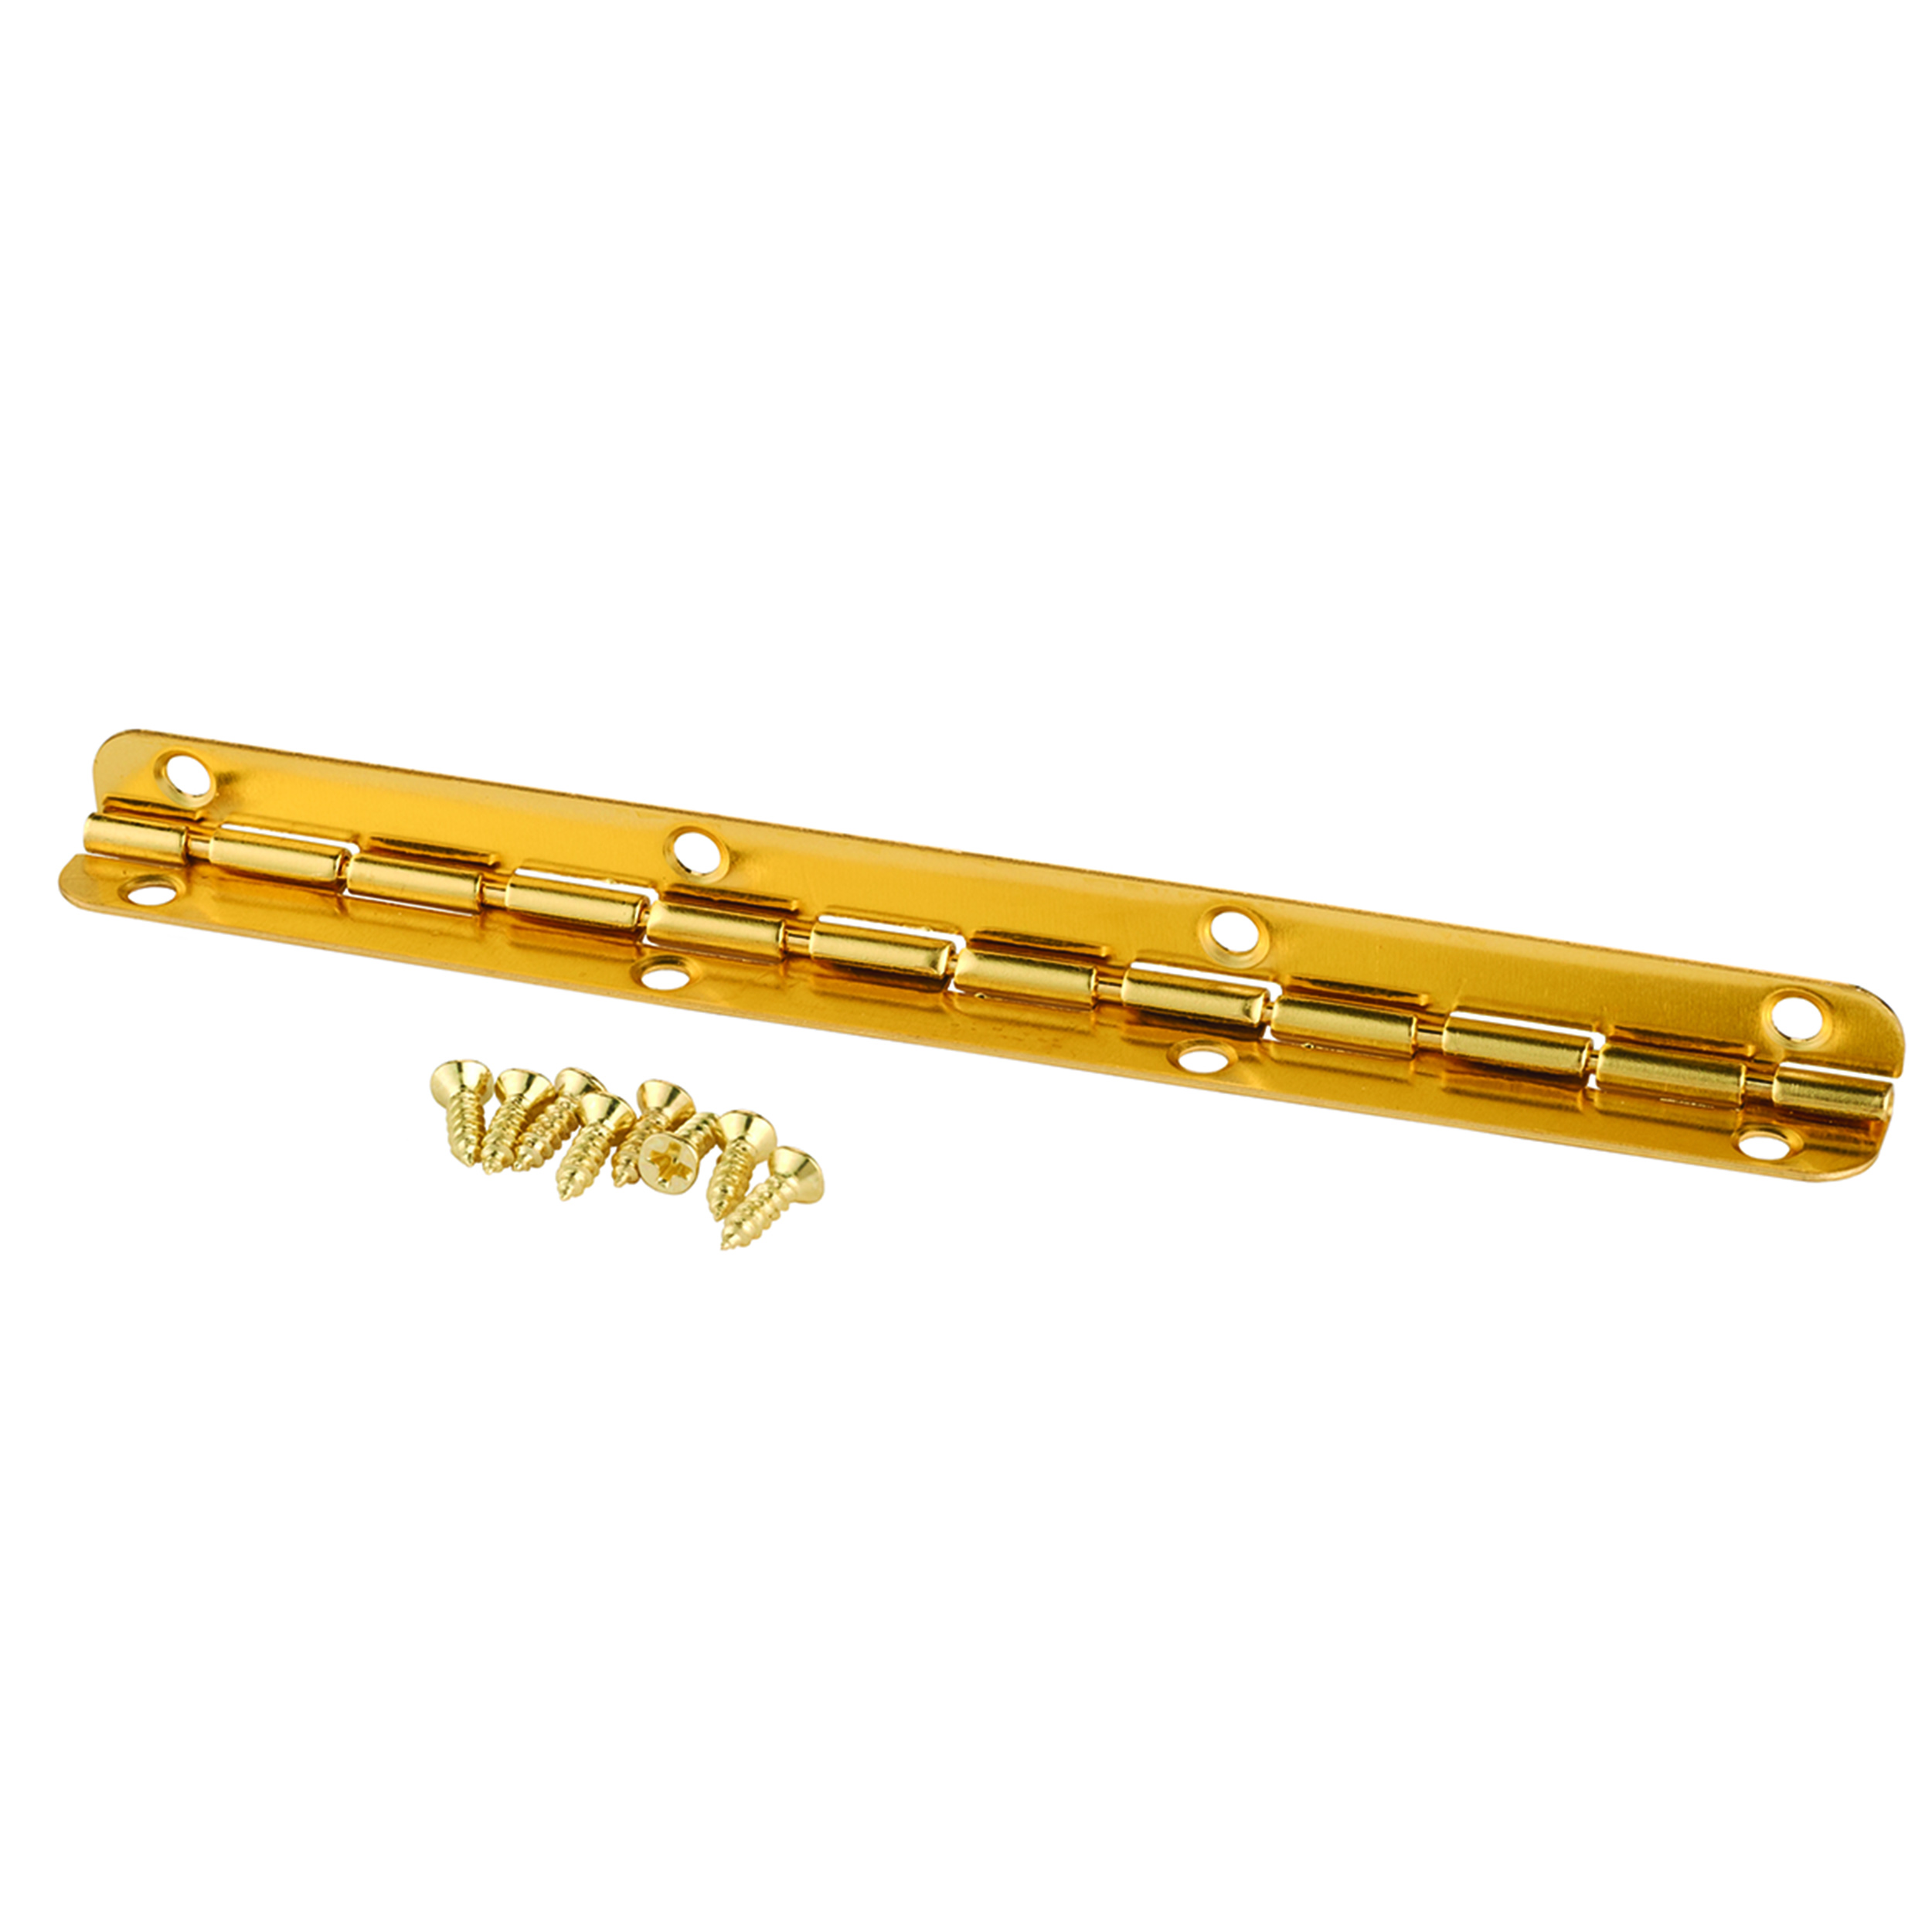 Small Piano Stop Hinge Brass Plated 115mm X 9mm